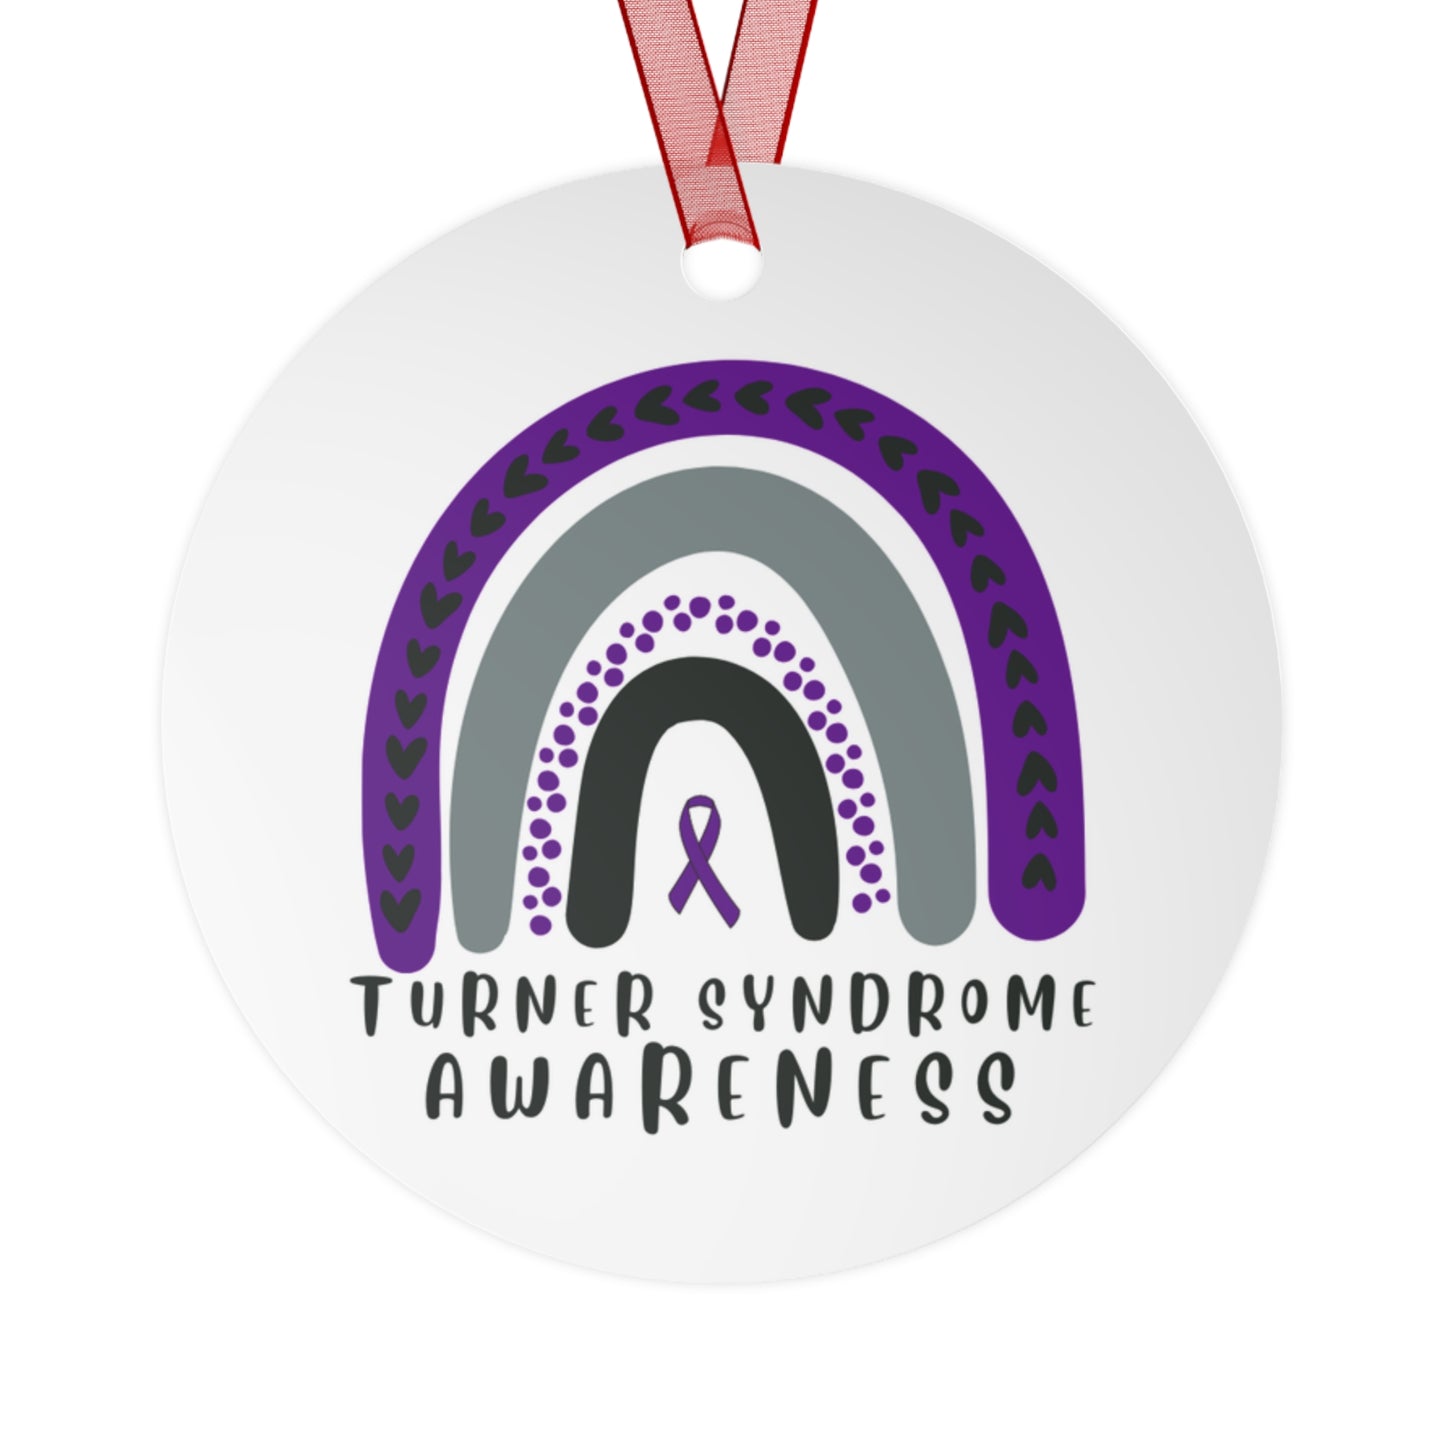 Turner Syndrome Awareness Christmas Ornament Stocking Stuffer Christmas Gift, Holiday Home Decor, Wall Hanging, Support for Frien